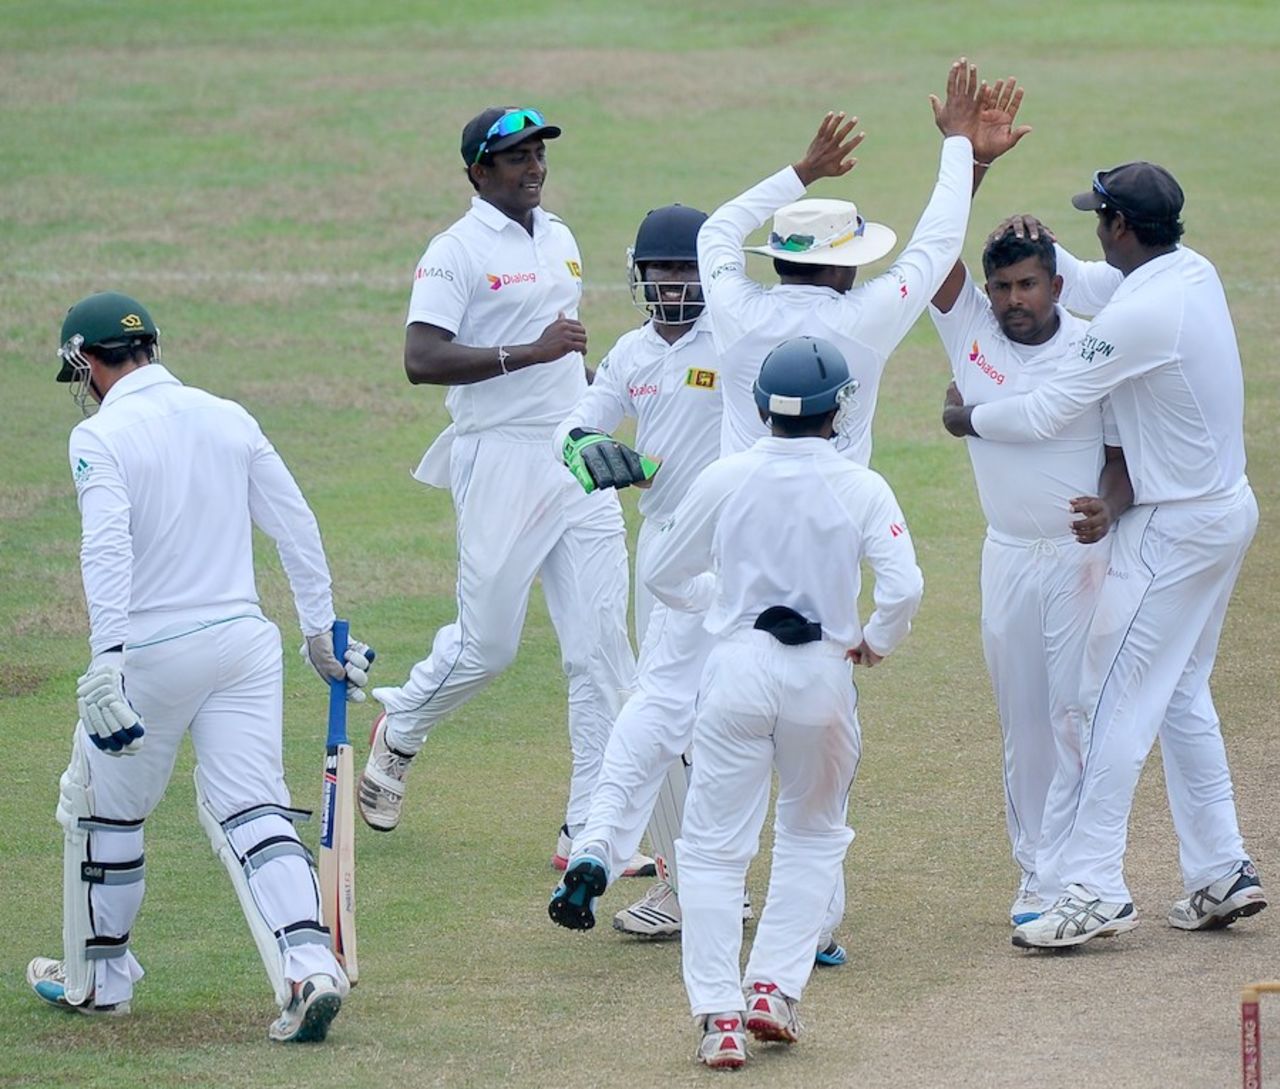 Rangana Herath is mobbed by team-mates for dismissing Quinton de Kock, Sri Lanka v South Africa, 2nd Test, Colombo, 5th day, July 28, 2014